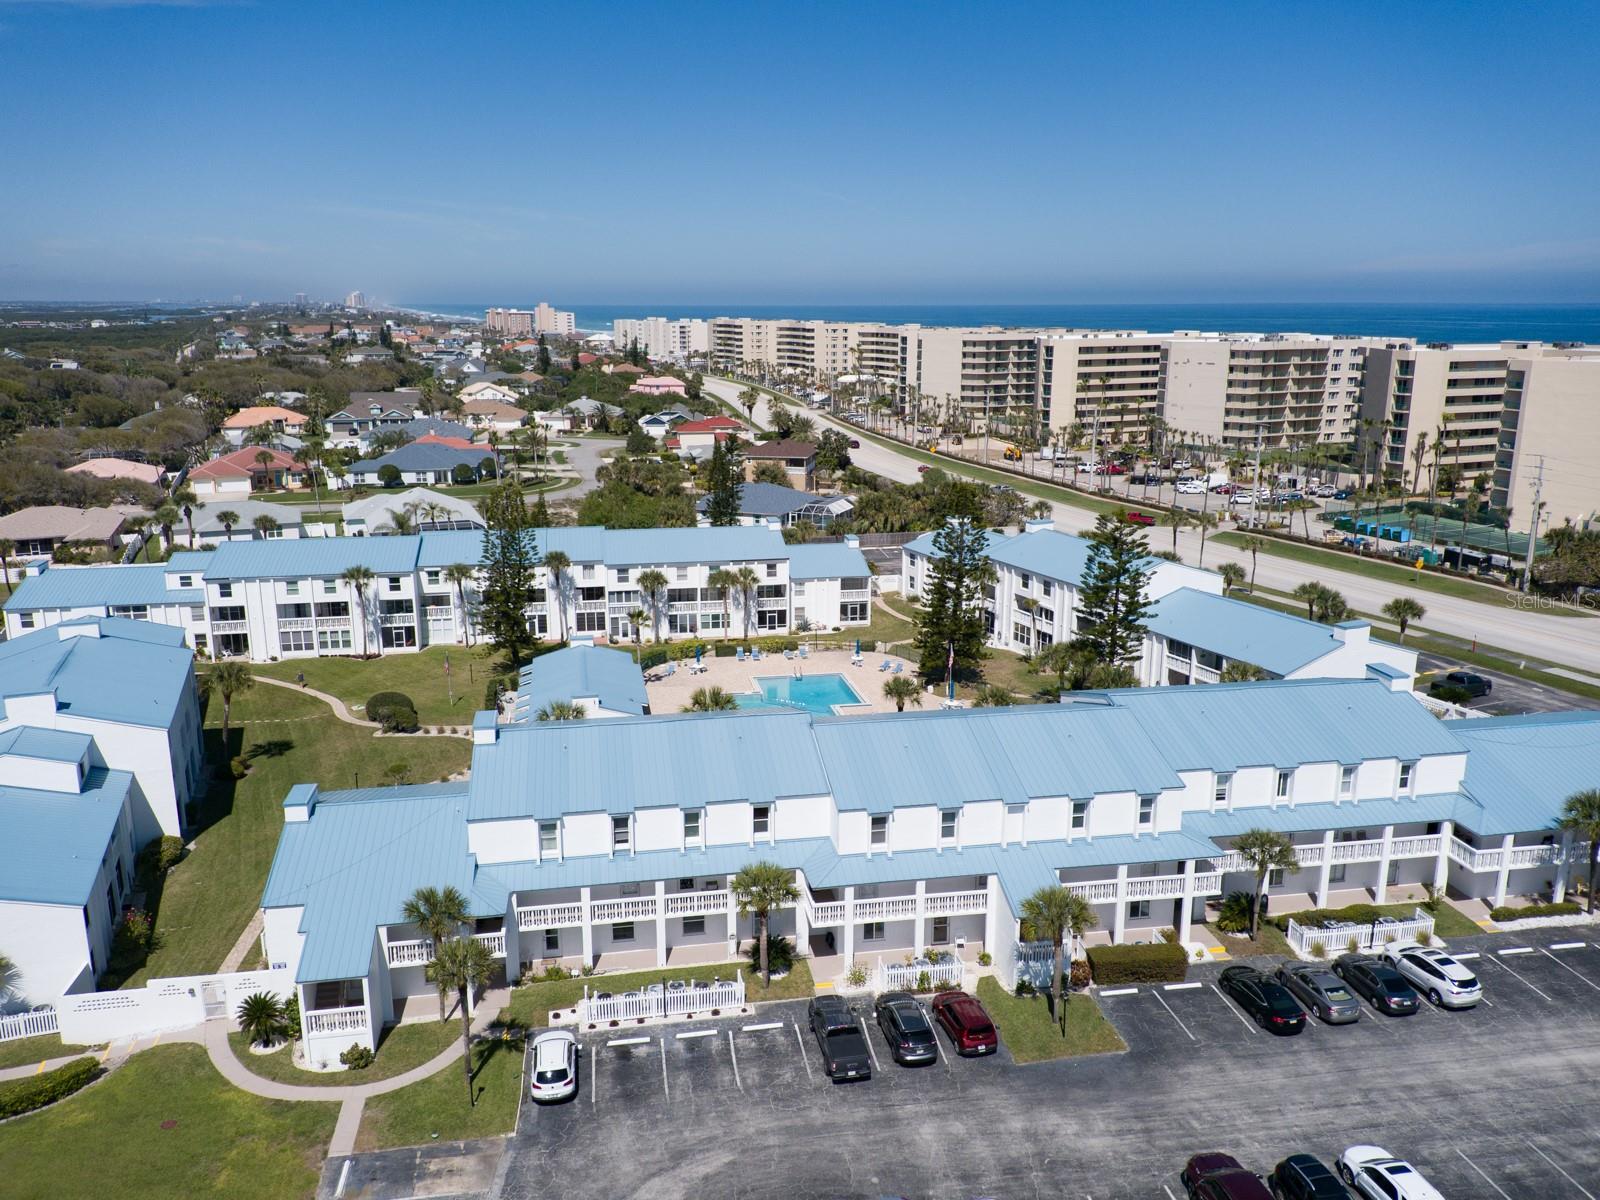 View PONCE INLET, FL 32127 condo